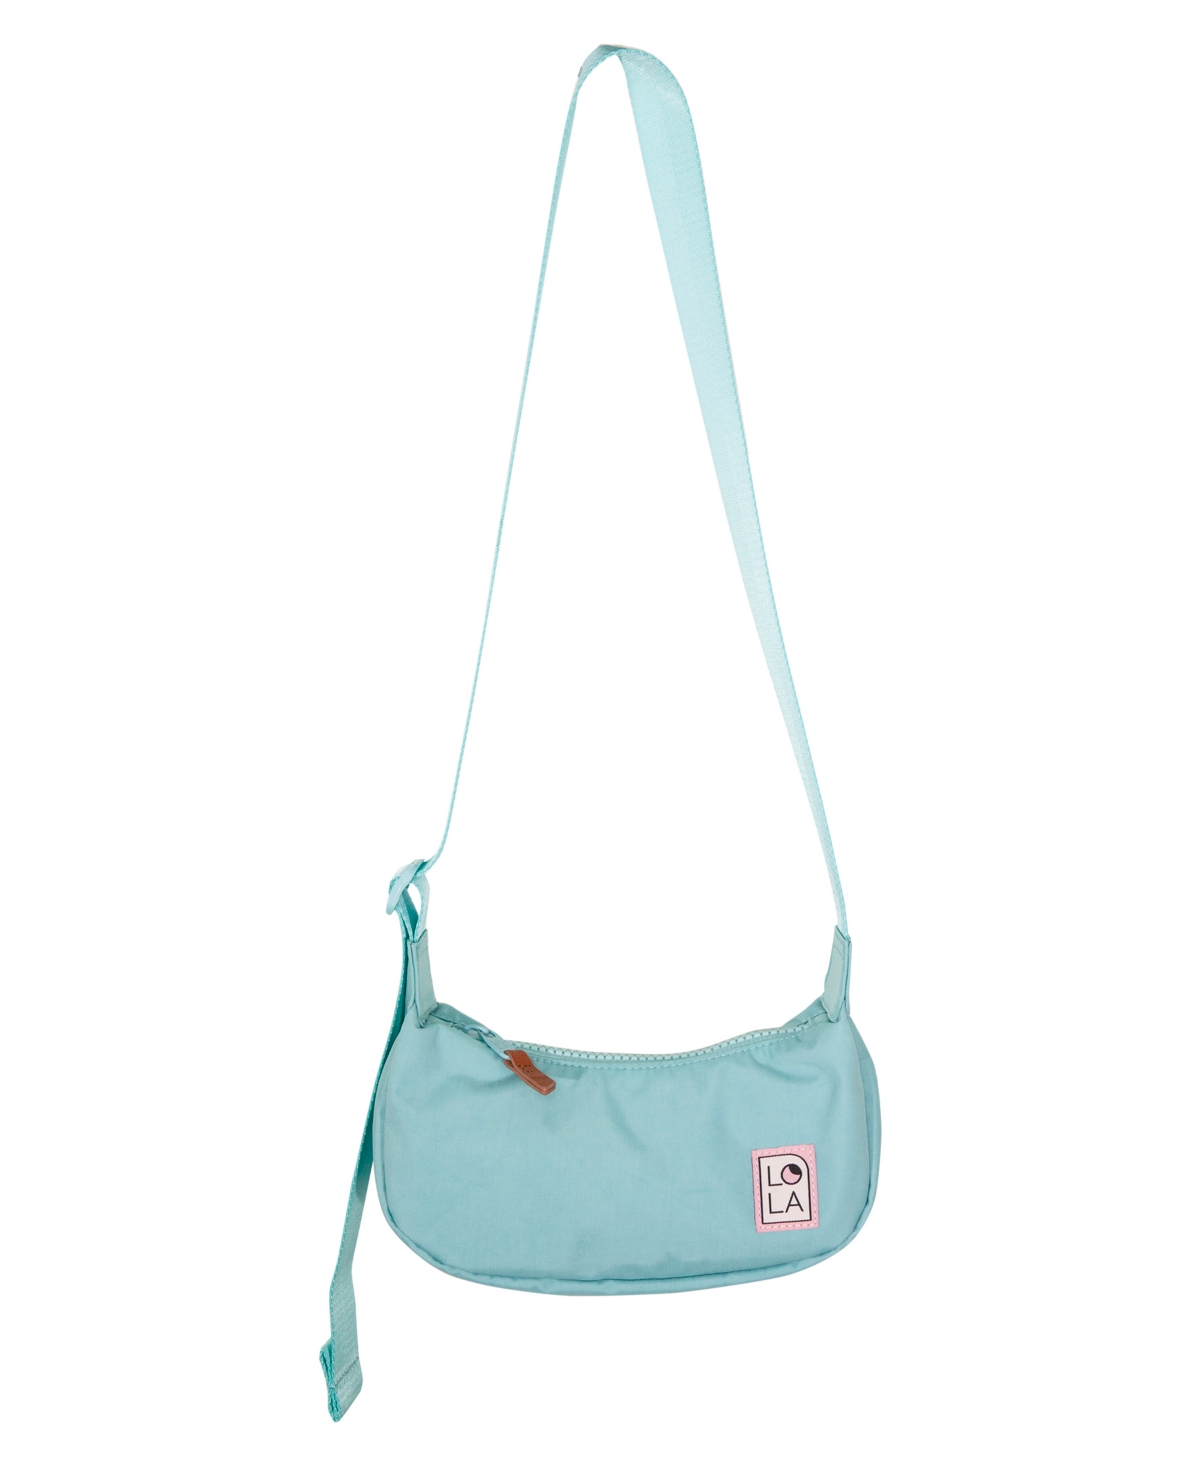 Lola Crescent Small Moon Bag In Blue